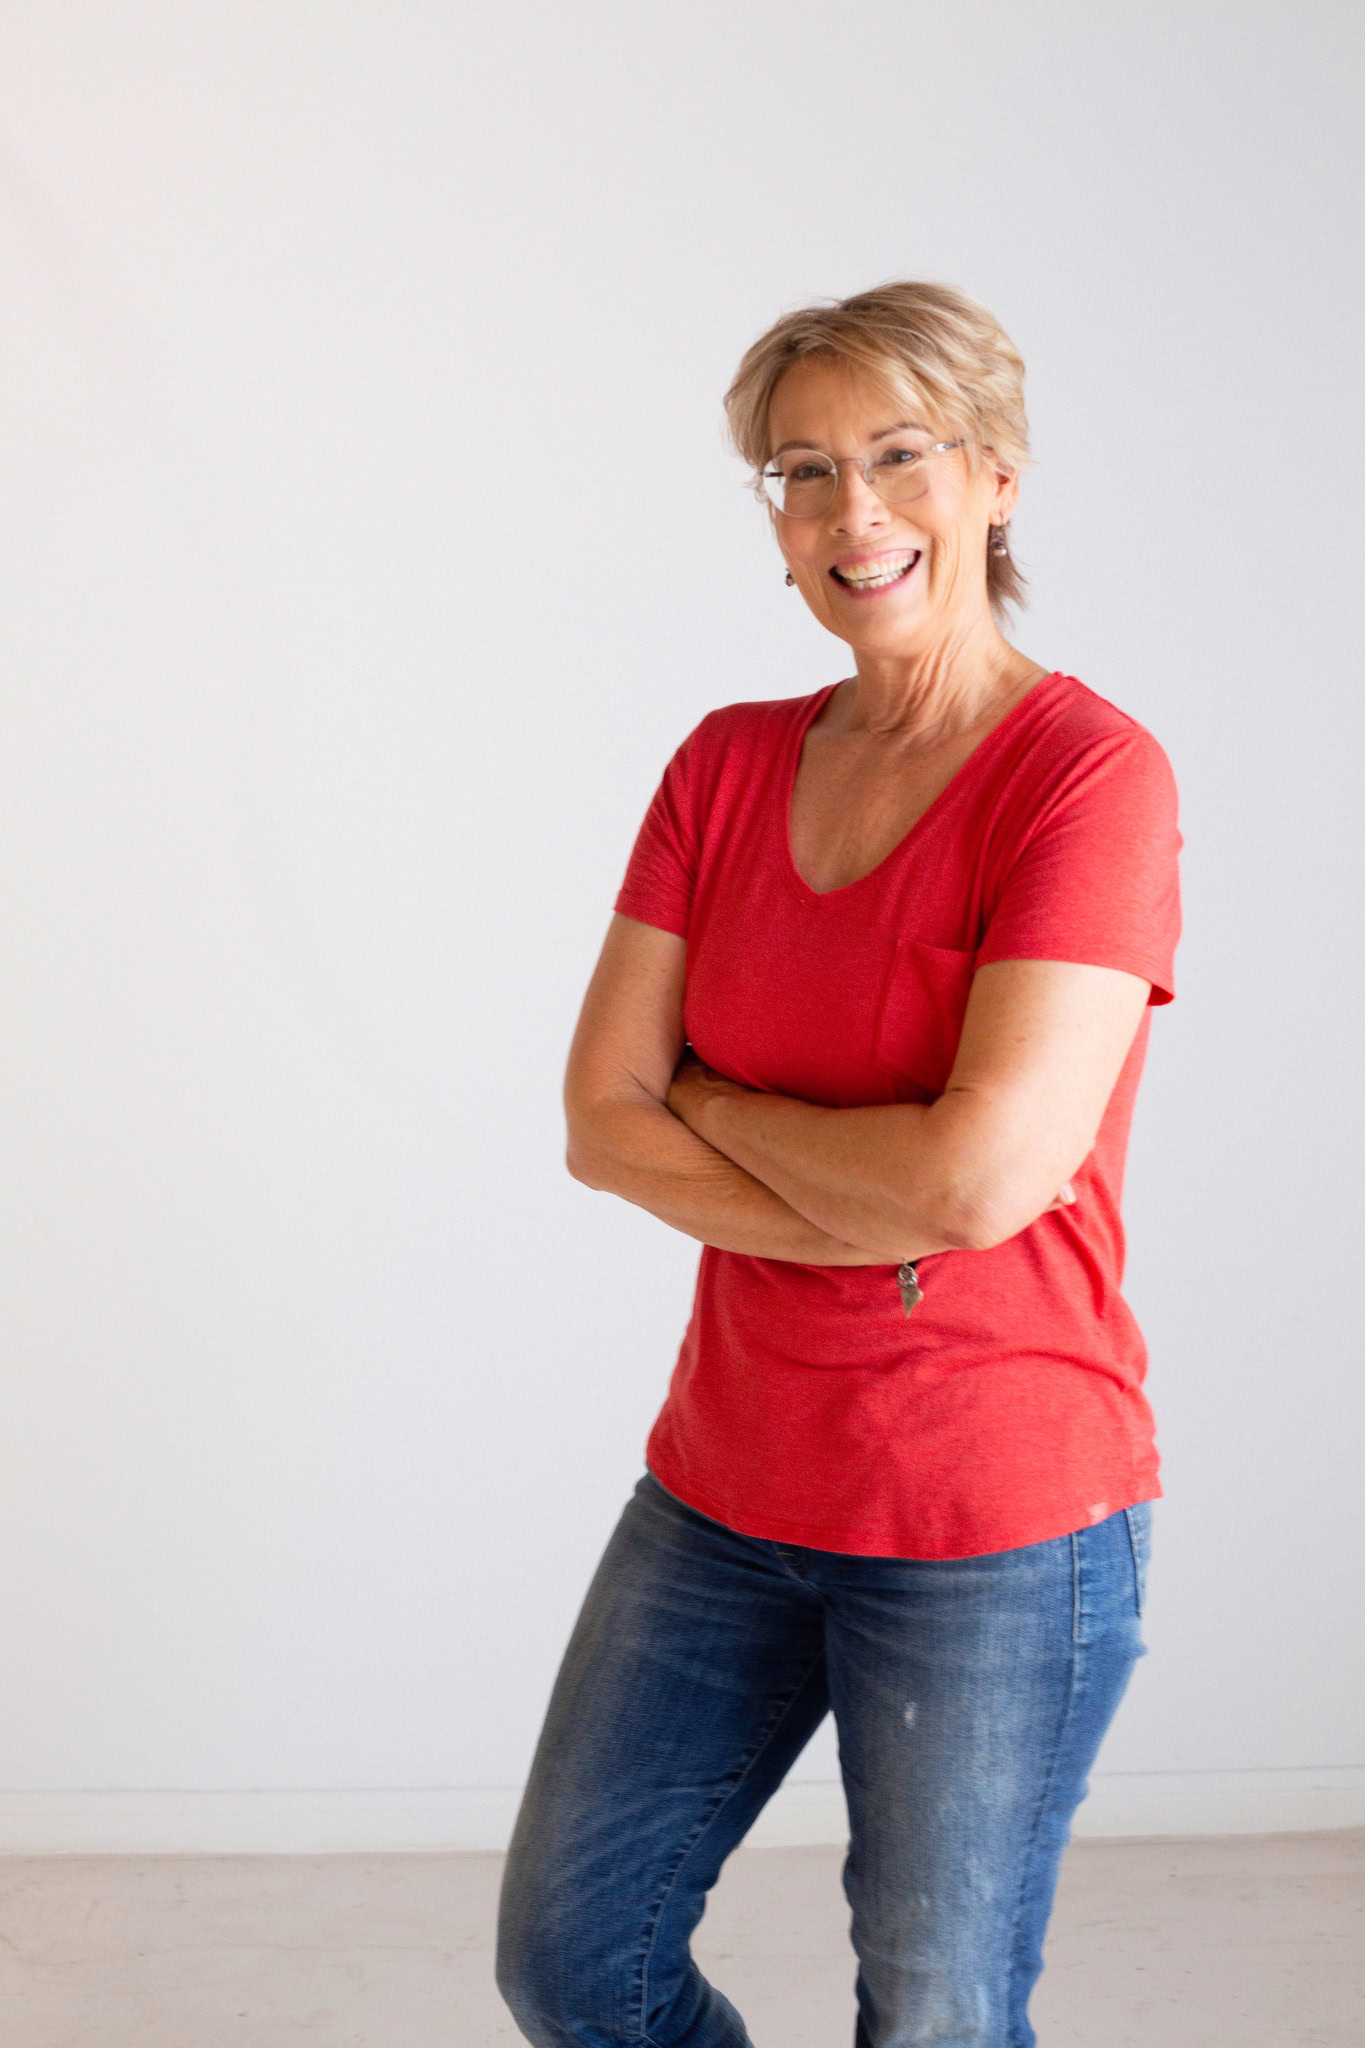 Kelly Howard smiling with glasses, wearing a red shirt and blue jeans, stands confidently with her arms crossed, embodying the role of community in fitness success.